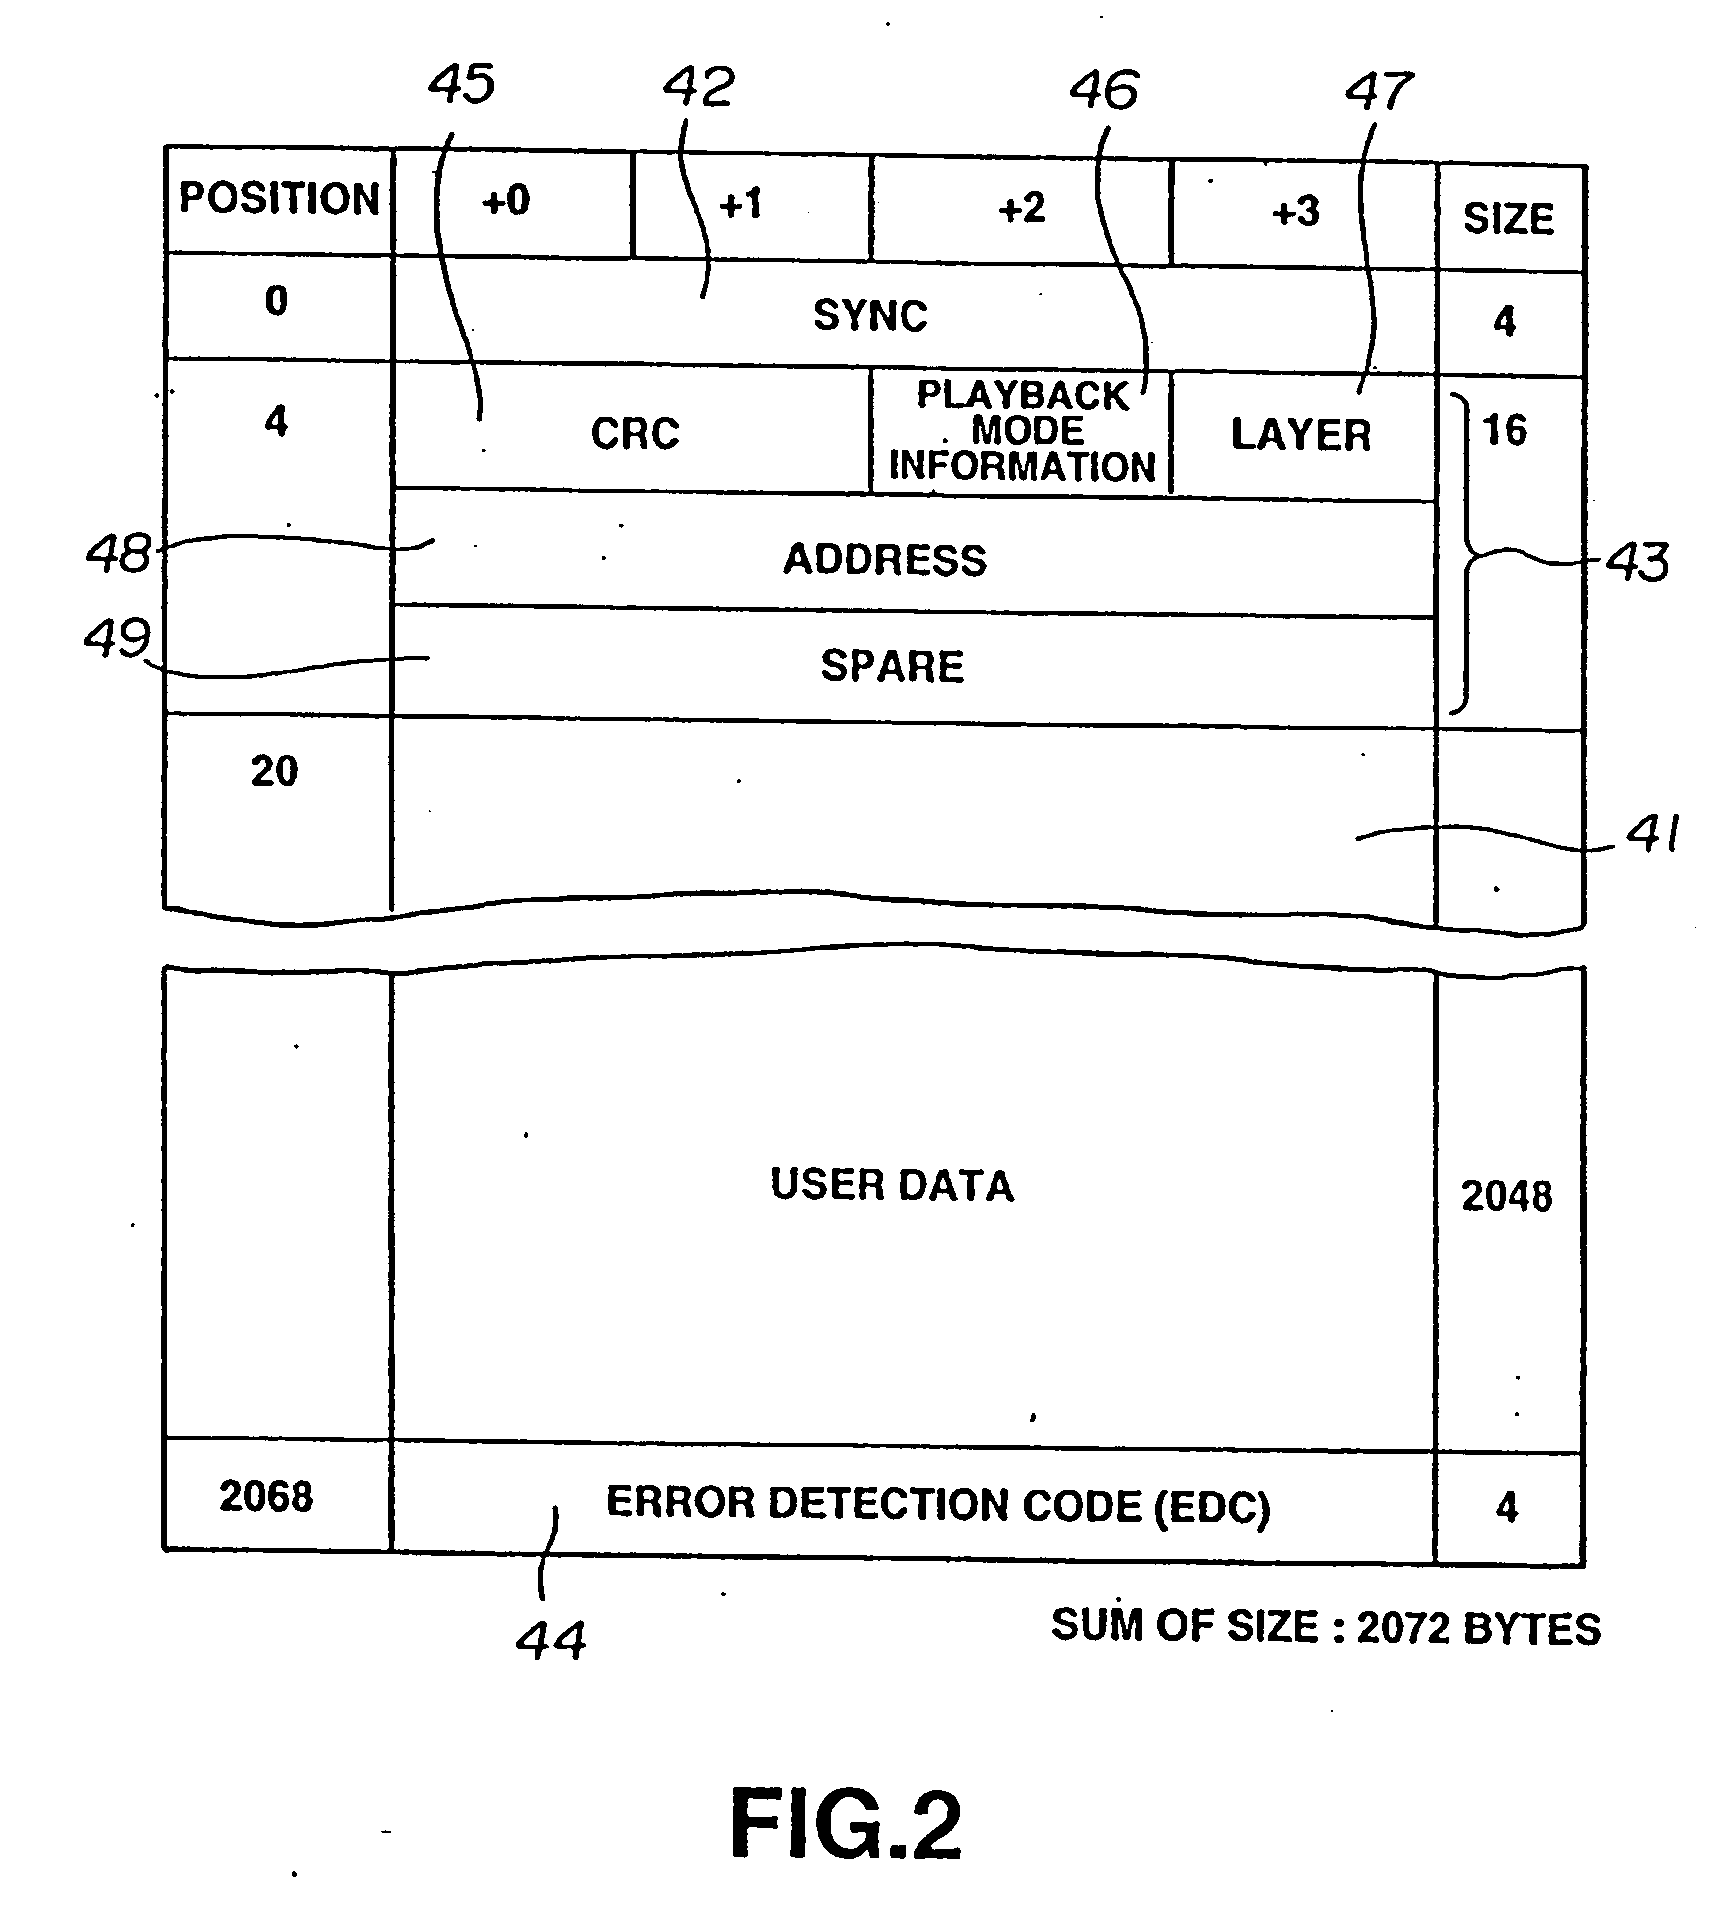 Method and apparatus for ciphering playback mode information for recording on record medium